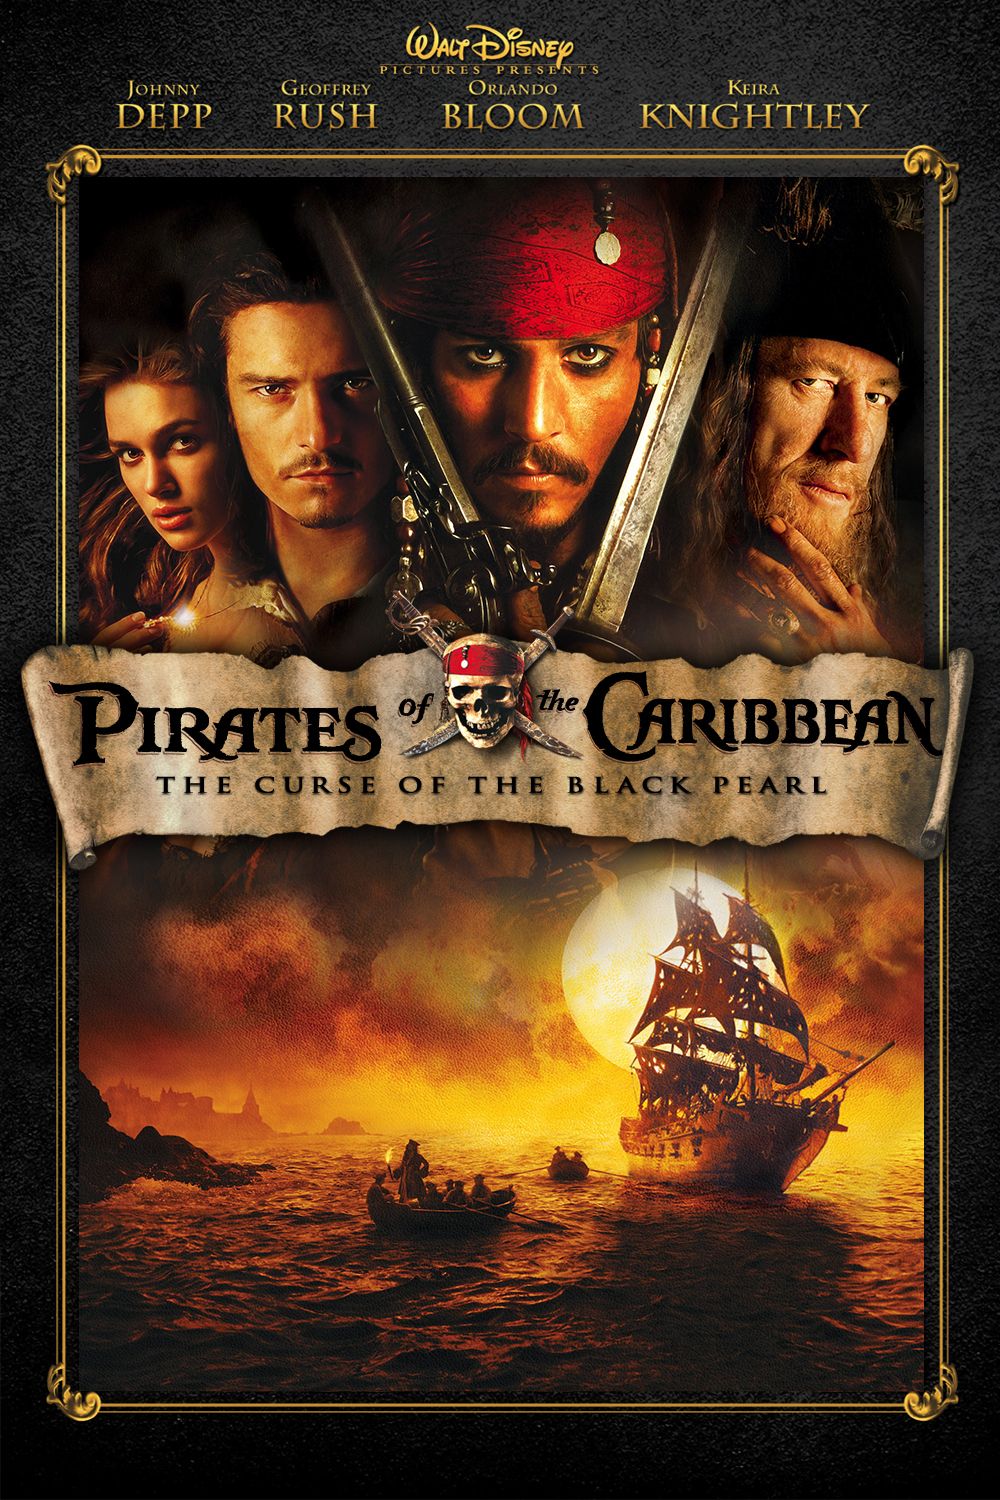 Pirates of the Caribbean: The Curse of the Black Pearl. Mr. Hipster Movies